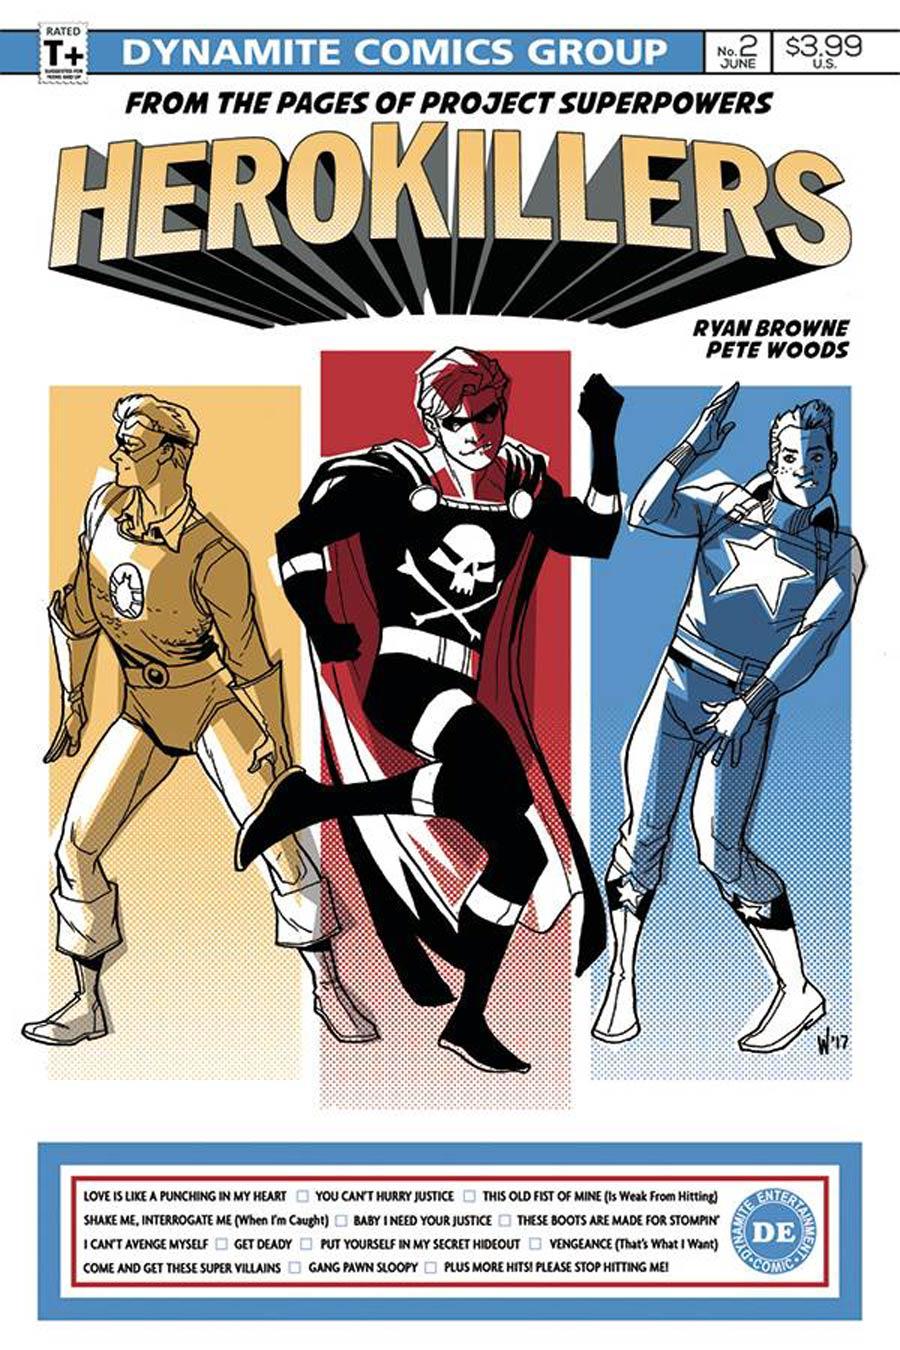 Project Superpowers Hero Killers Vol. 1 #2